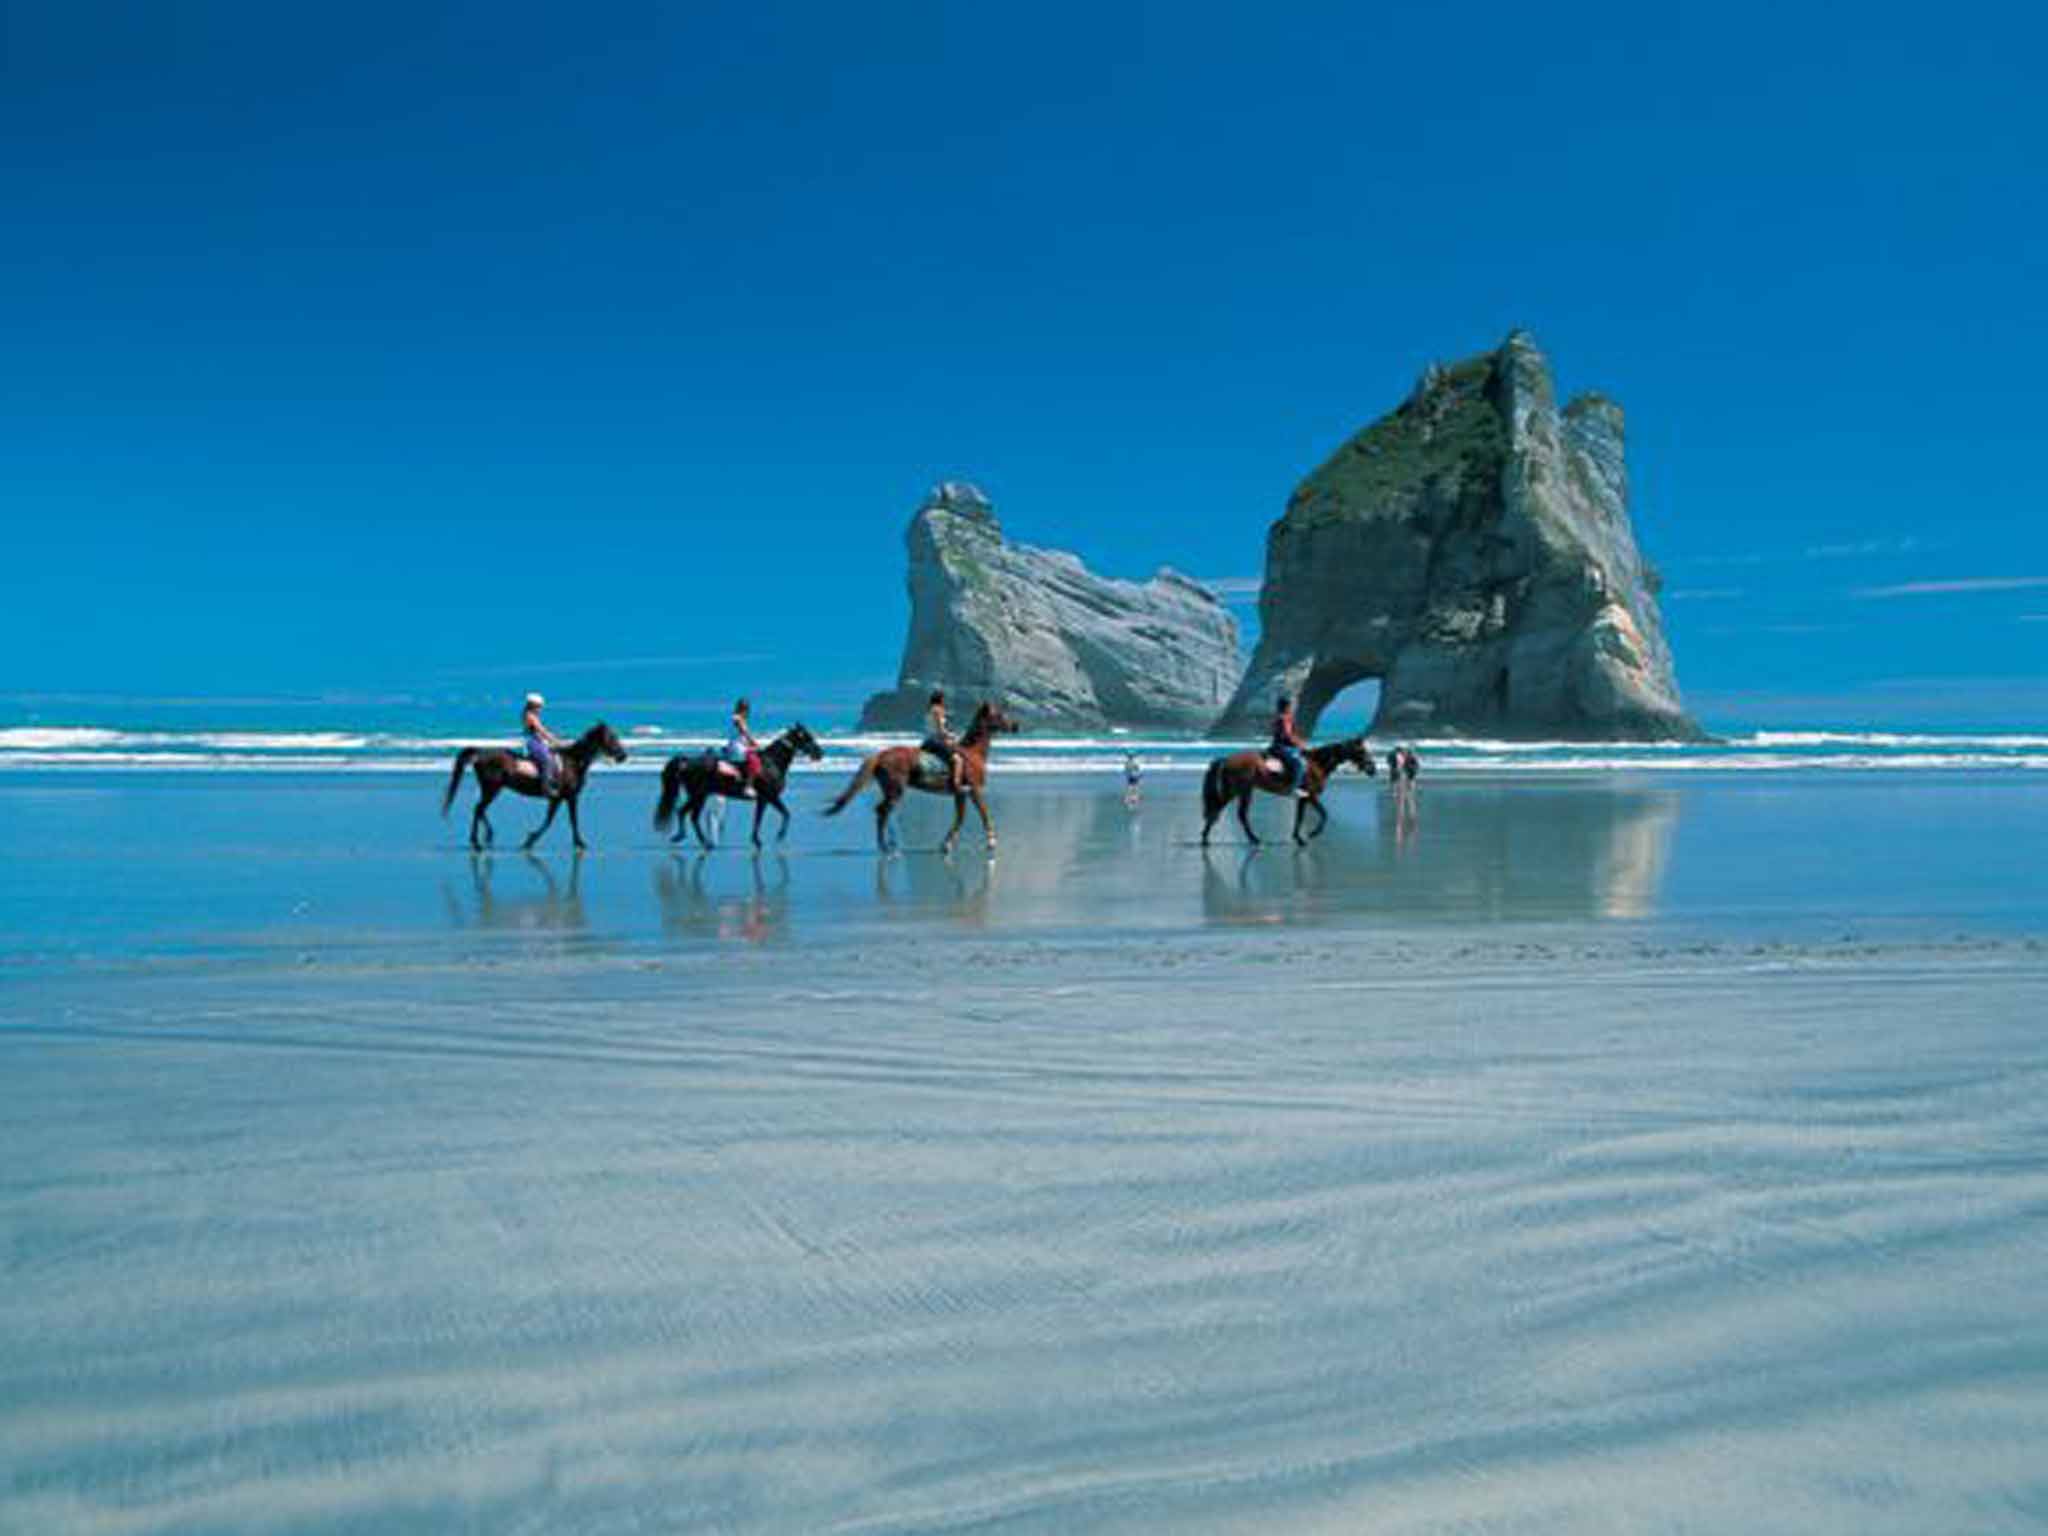 Horses for courses: New Zealand nails it with ‘100% Pure’